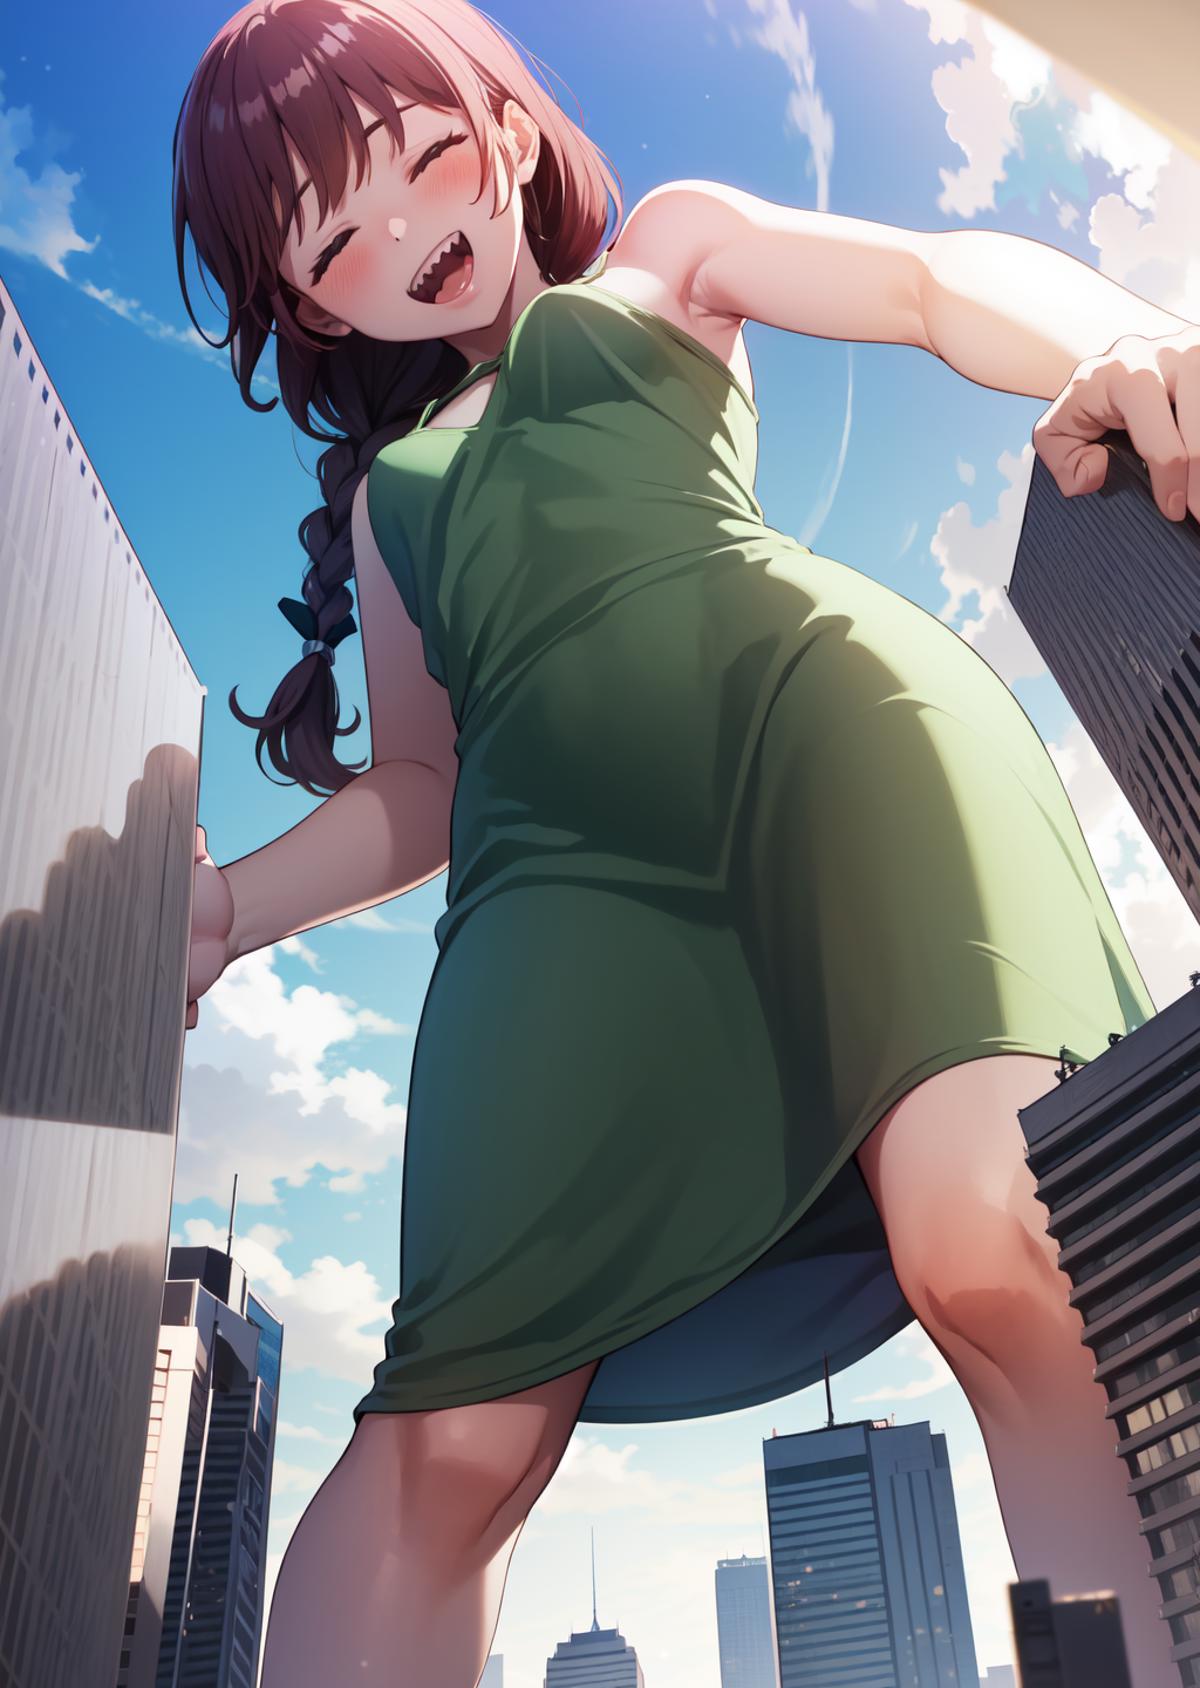 Giantess | Concept image by DrP987